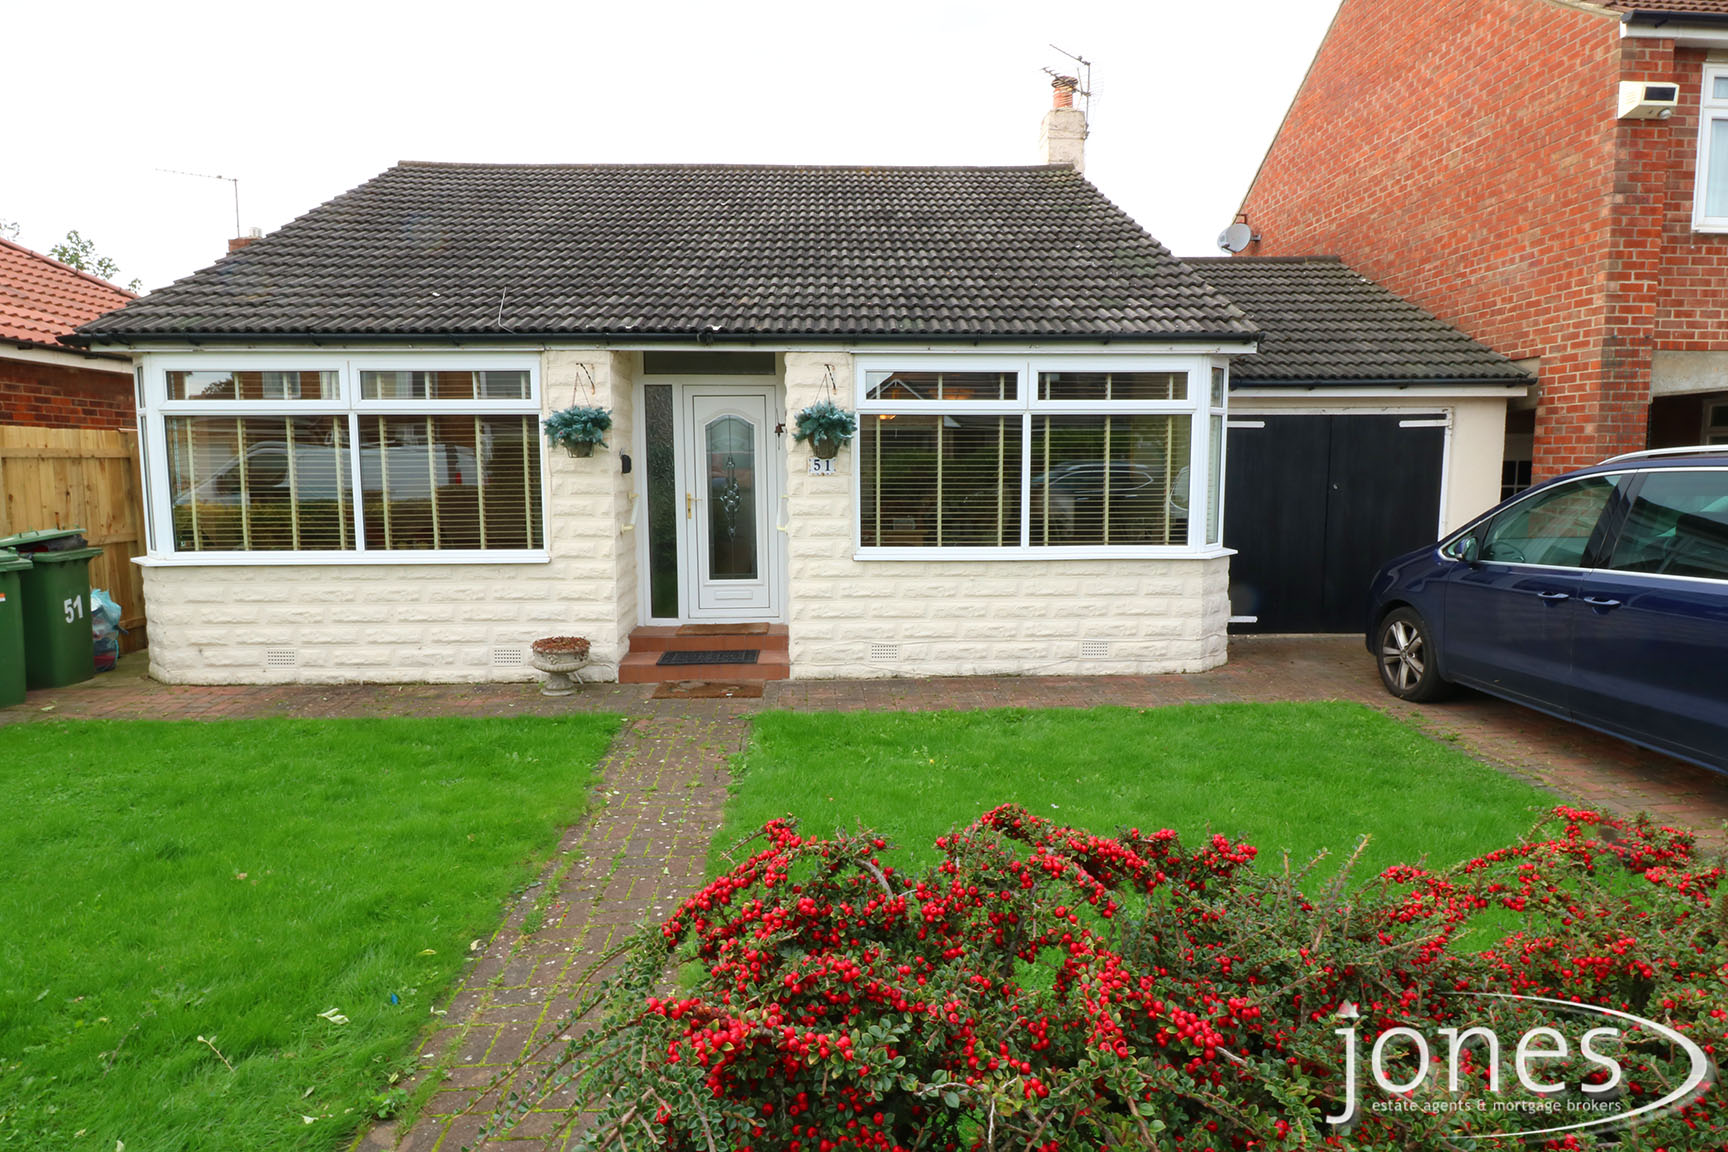 Home for Sale Let - Photo 01 Richardson Road, Thornaby,Stockton on Tees,TS17 8QE